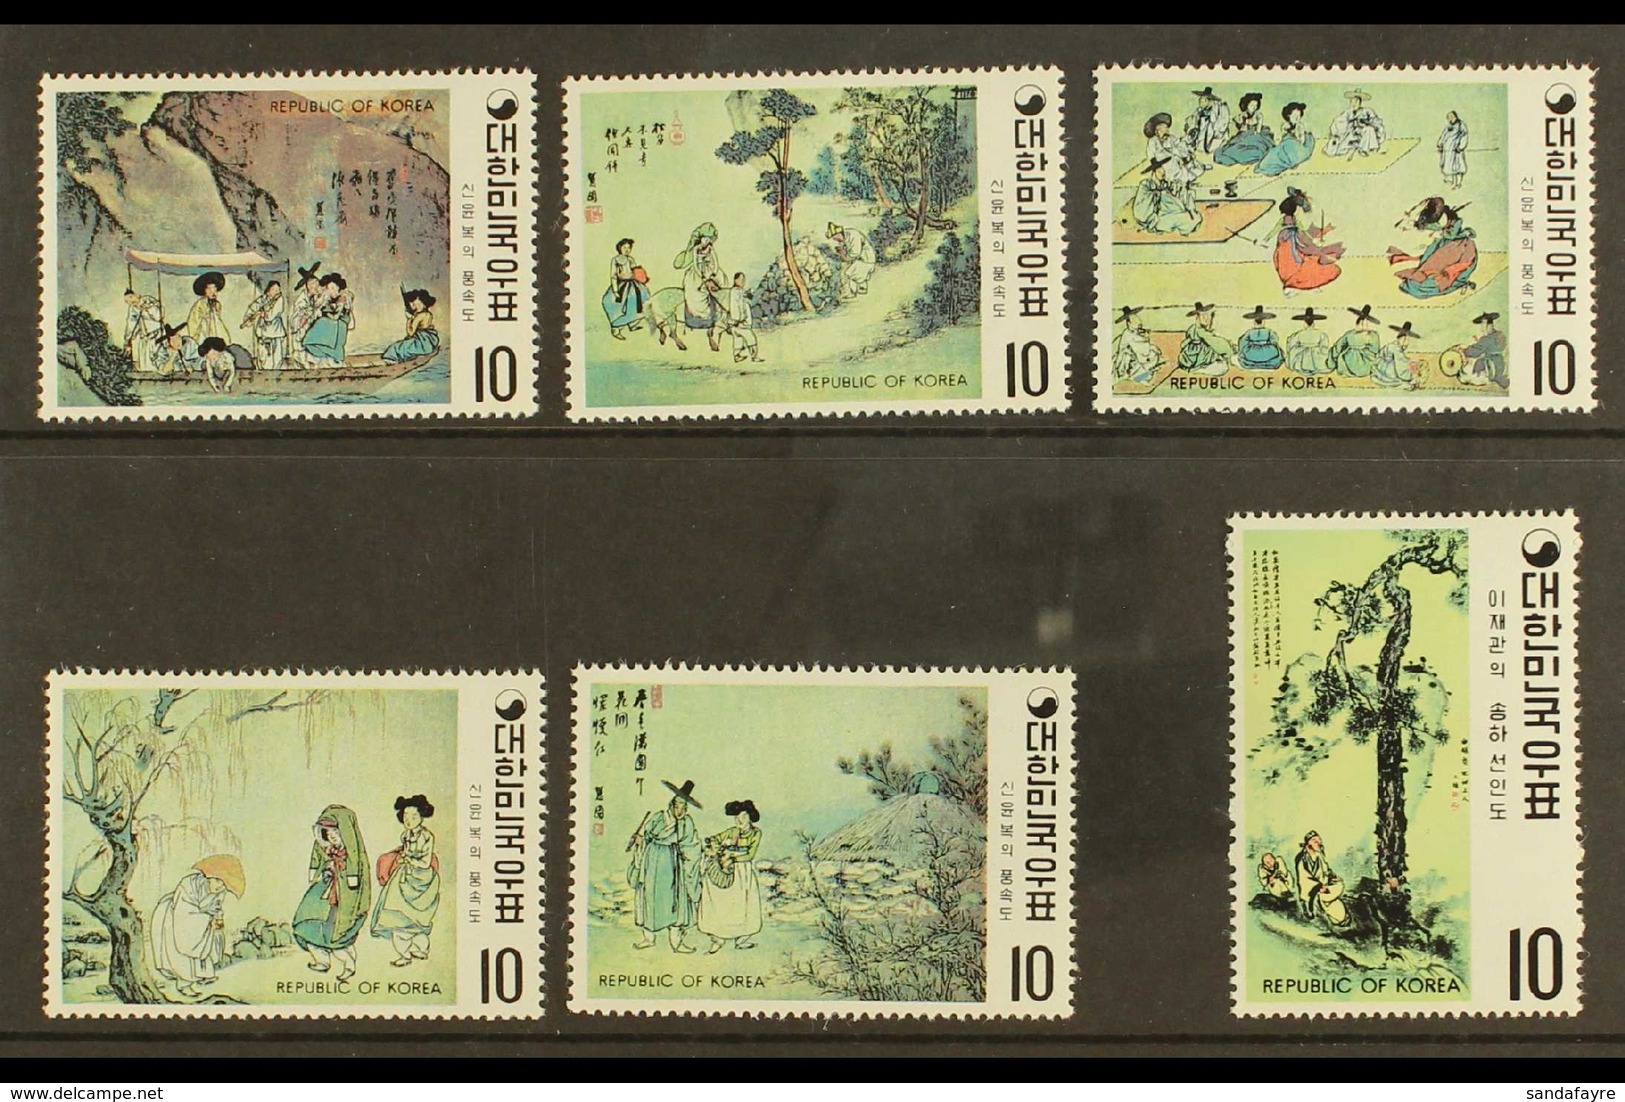 1971 Painting Fourth Series Complete Set & All Mini-sheets, SG 947/52 & MS 953, Fine Never Hinged Mint, Fresh. (6 Stamps - Korea (Zuid)